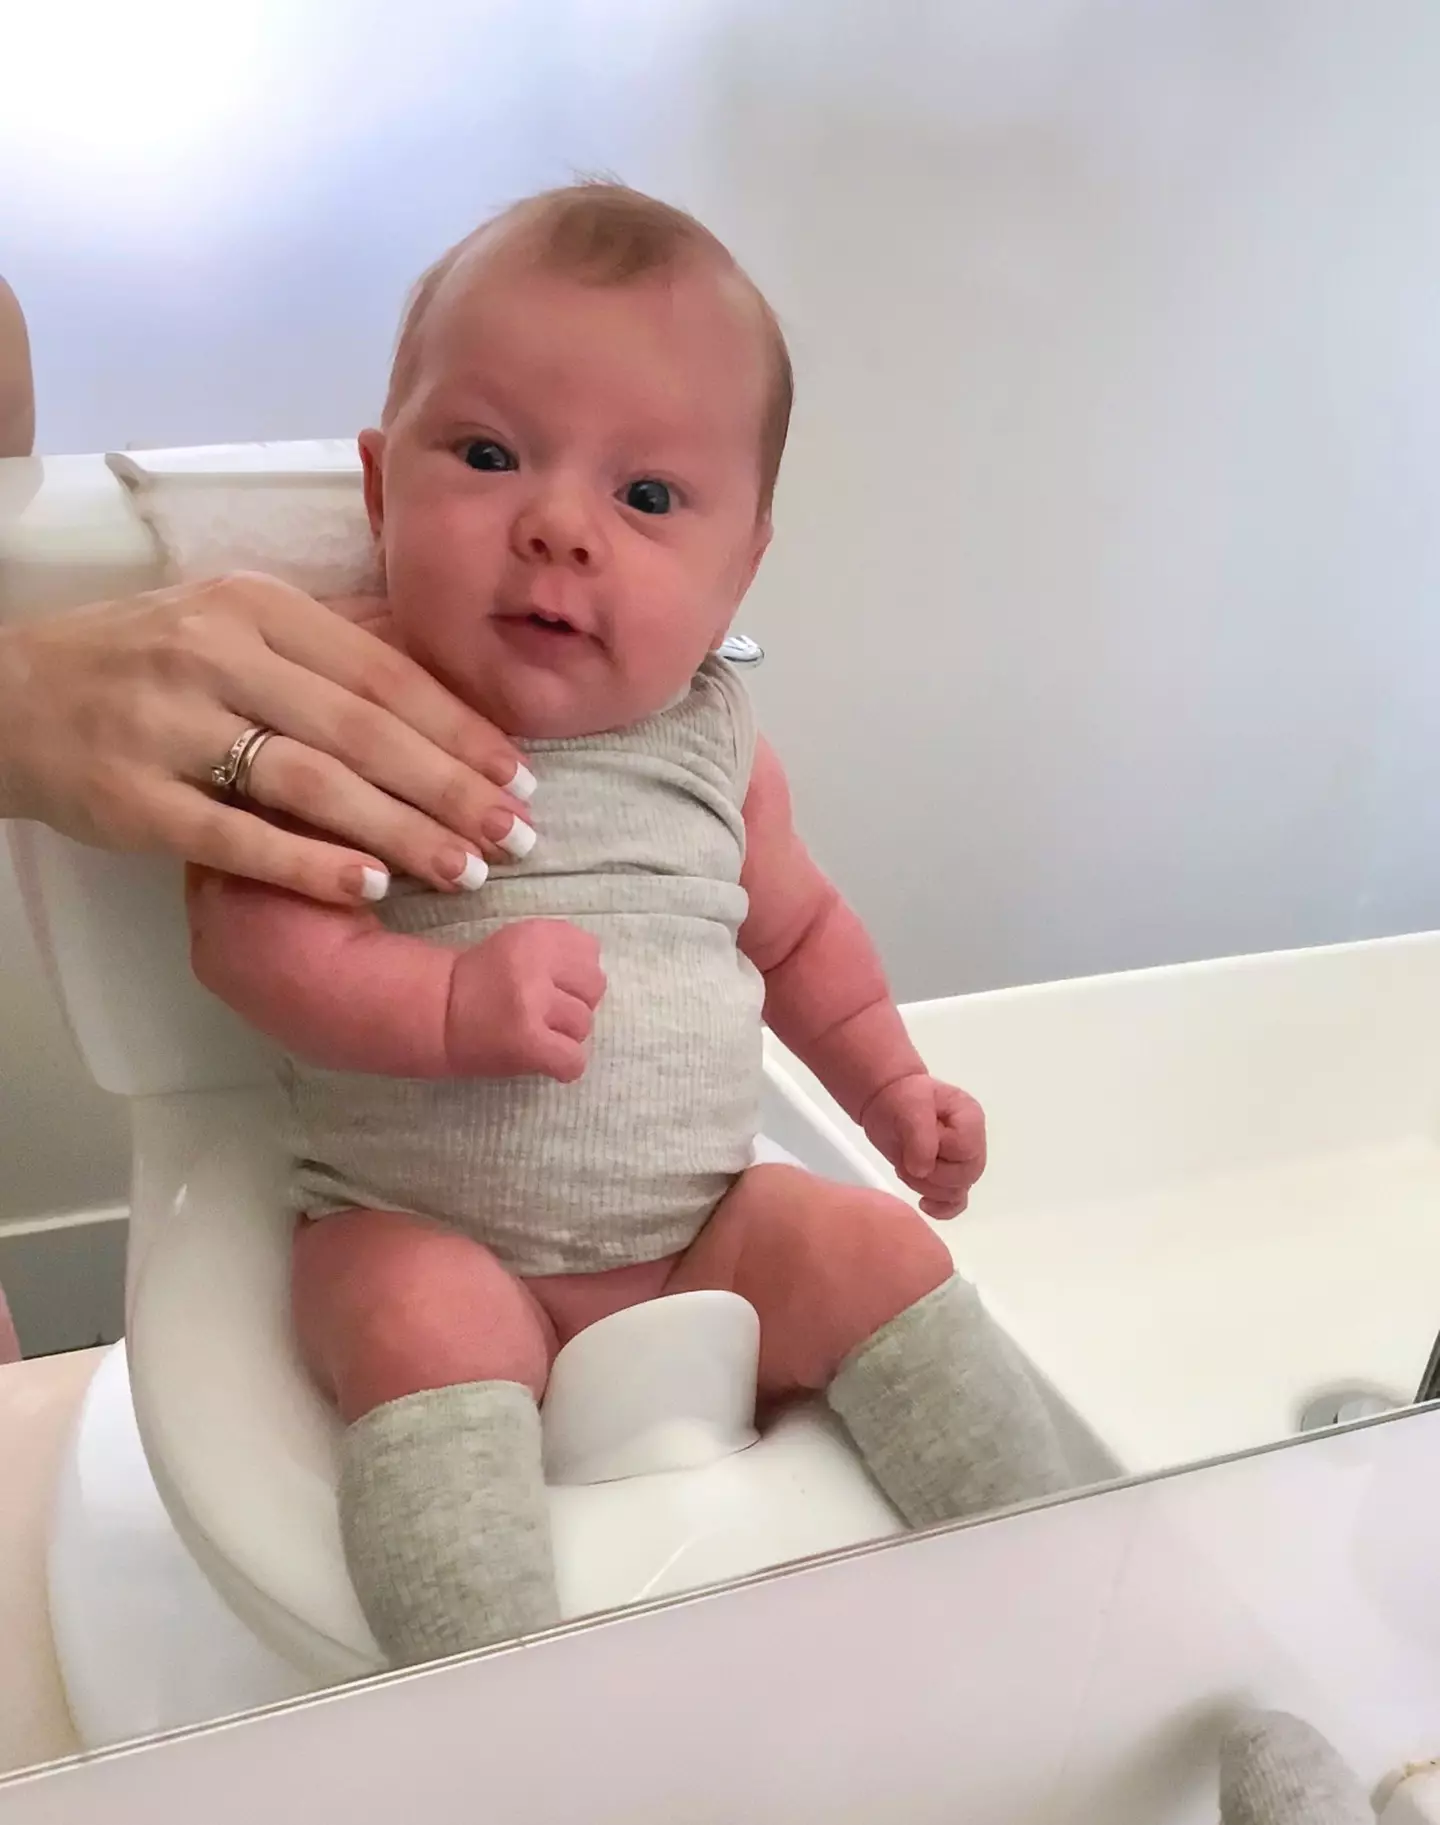 Mum Zarah started potty-training her son when he was just one-month old.